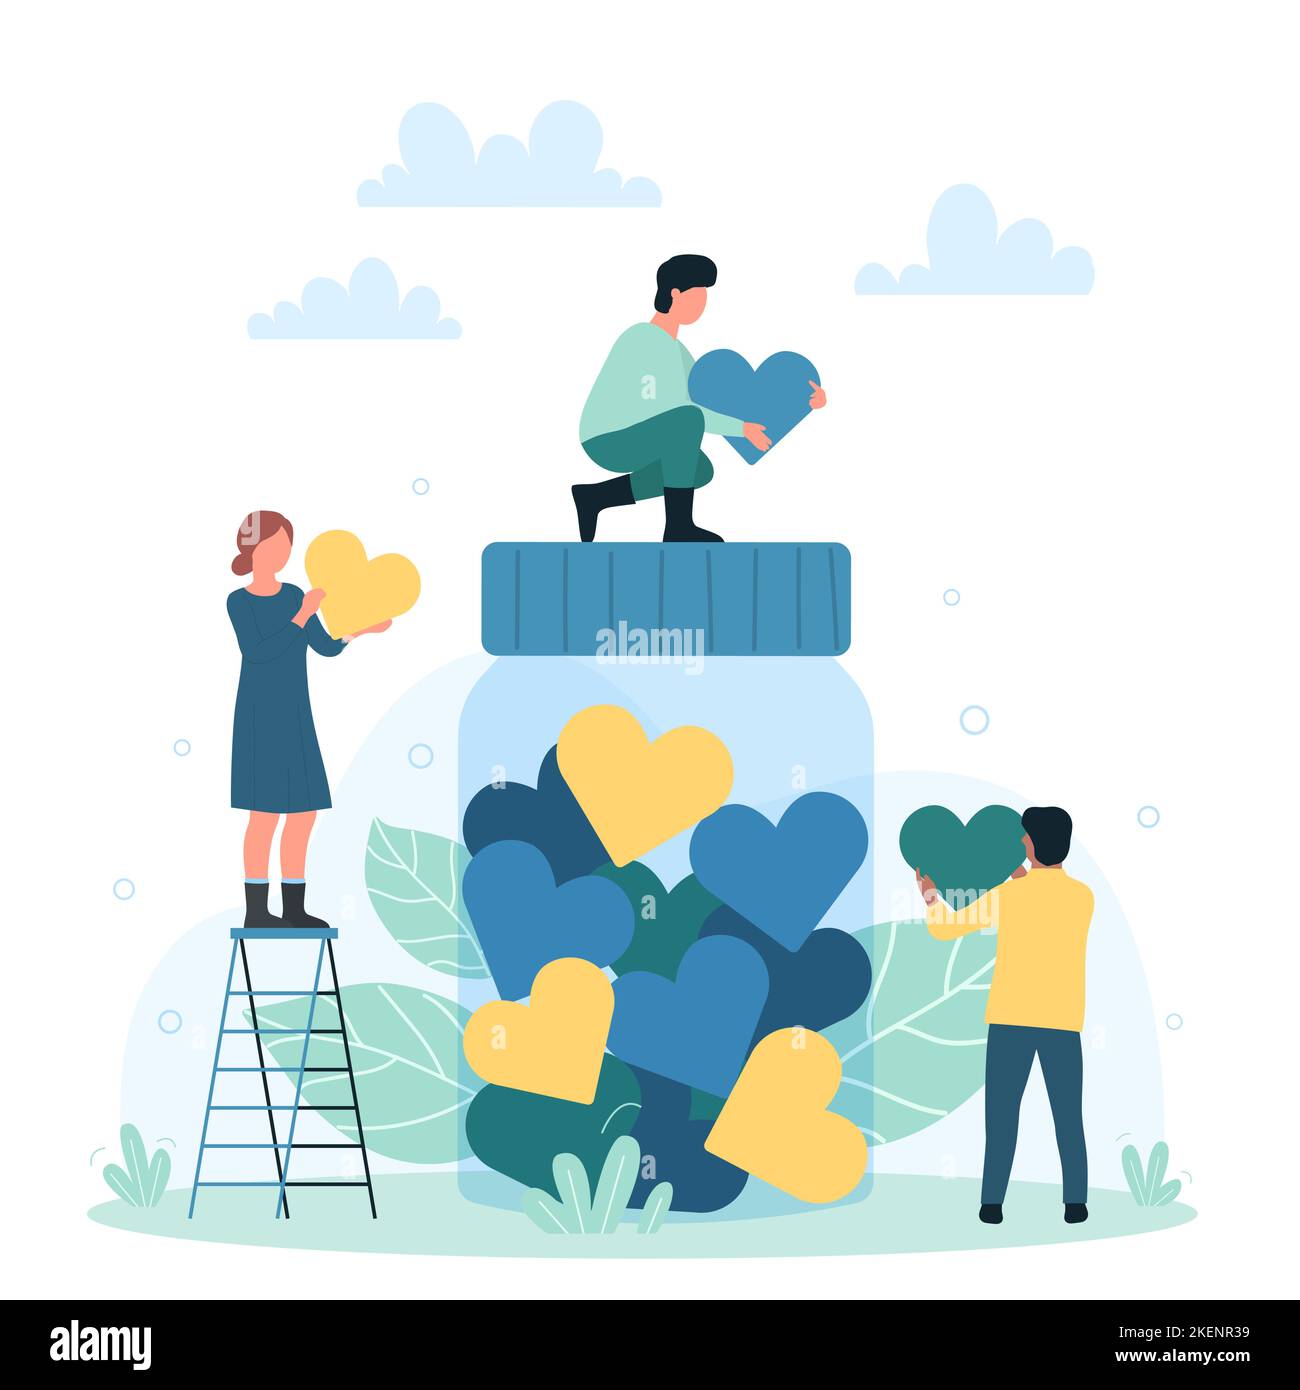 Charity campaign and generous social help vector illustration. Cartoon tiny people donate hearts into jar, volunteers give support and care, blood and money to save life and health. Awareness concept Stock Vector